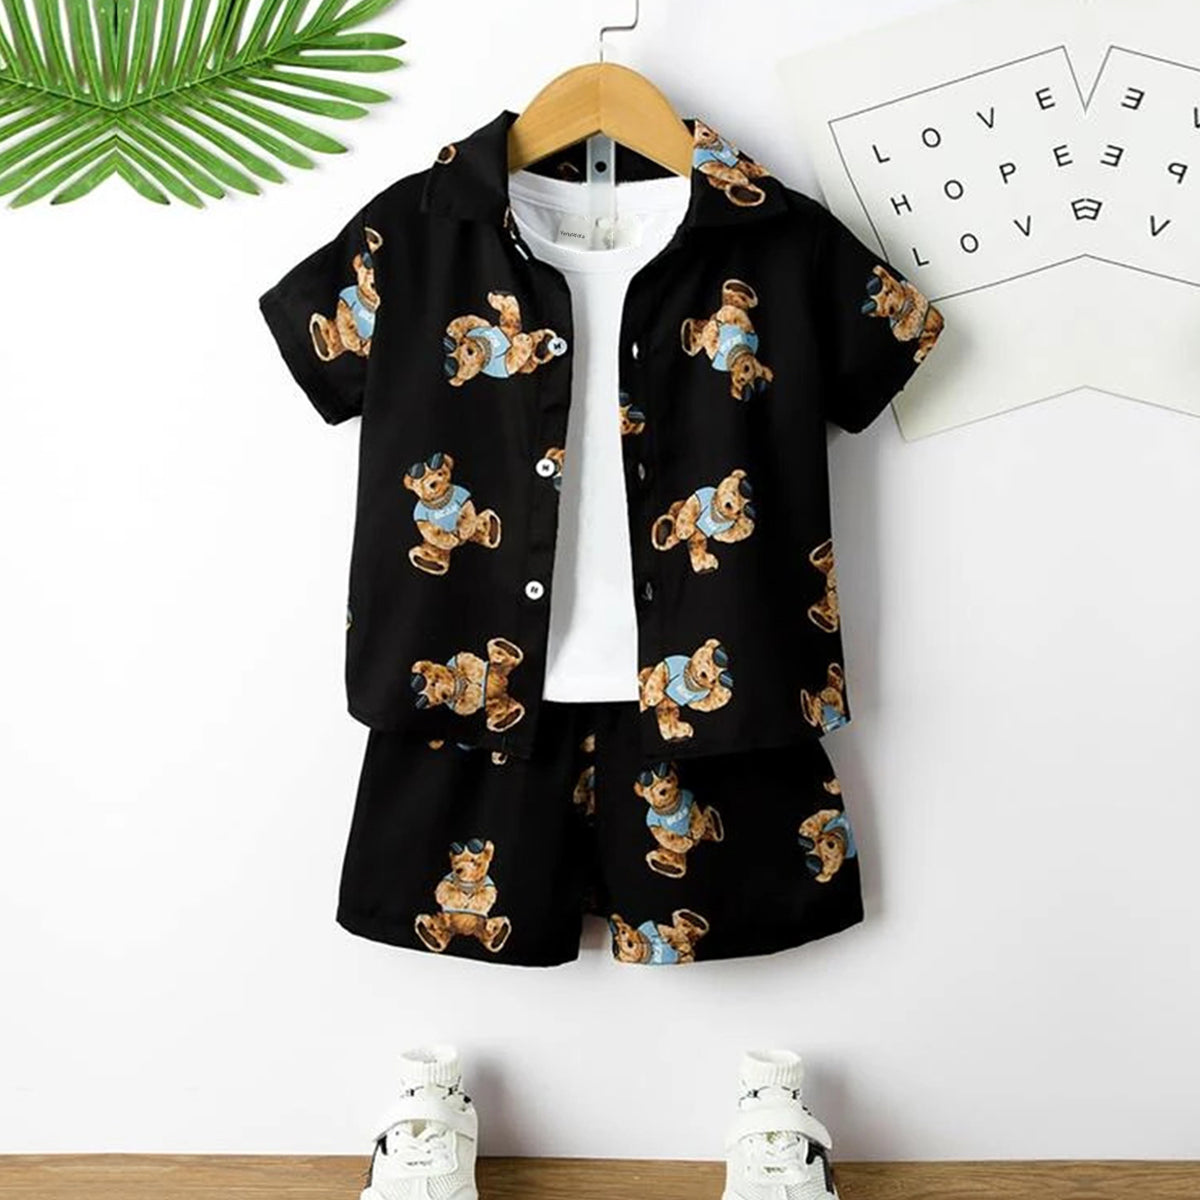 Venutaloza Baby Set Floral & Dinosaur and Apricot-Colored (Combo Pack Of 3) Casual Printed Shirt & Shorts Without tee Two Piece Set For Boy & Girls.